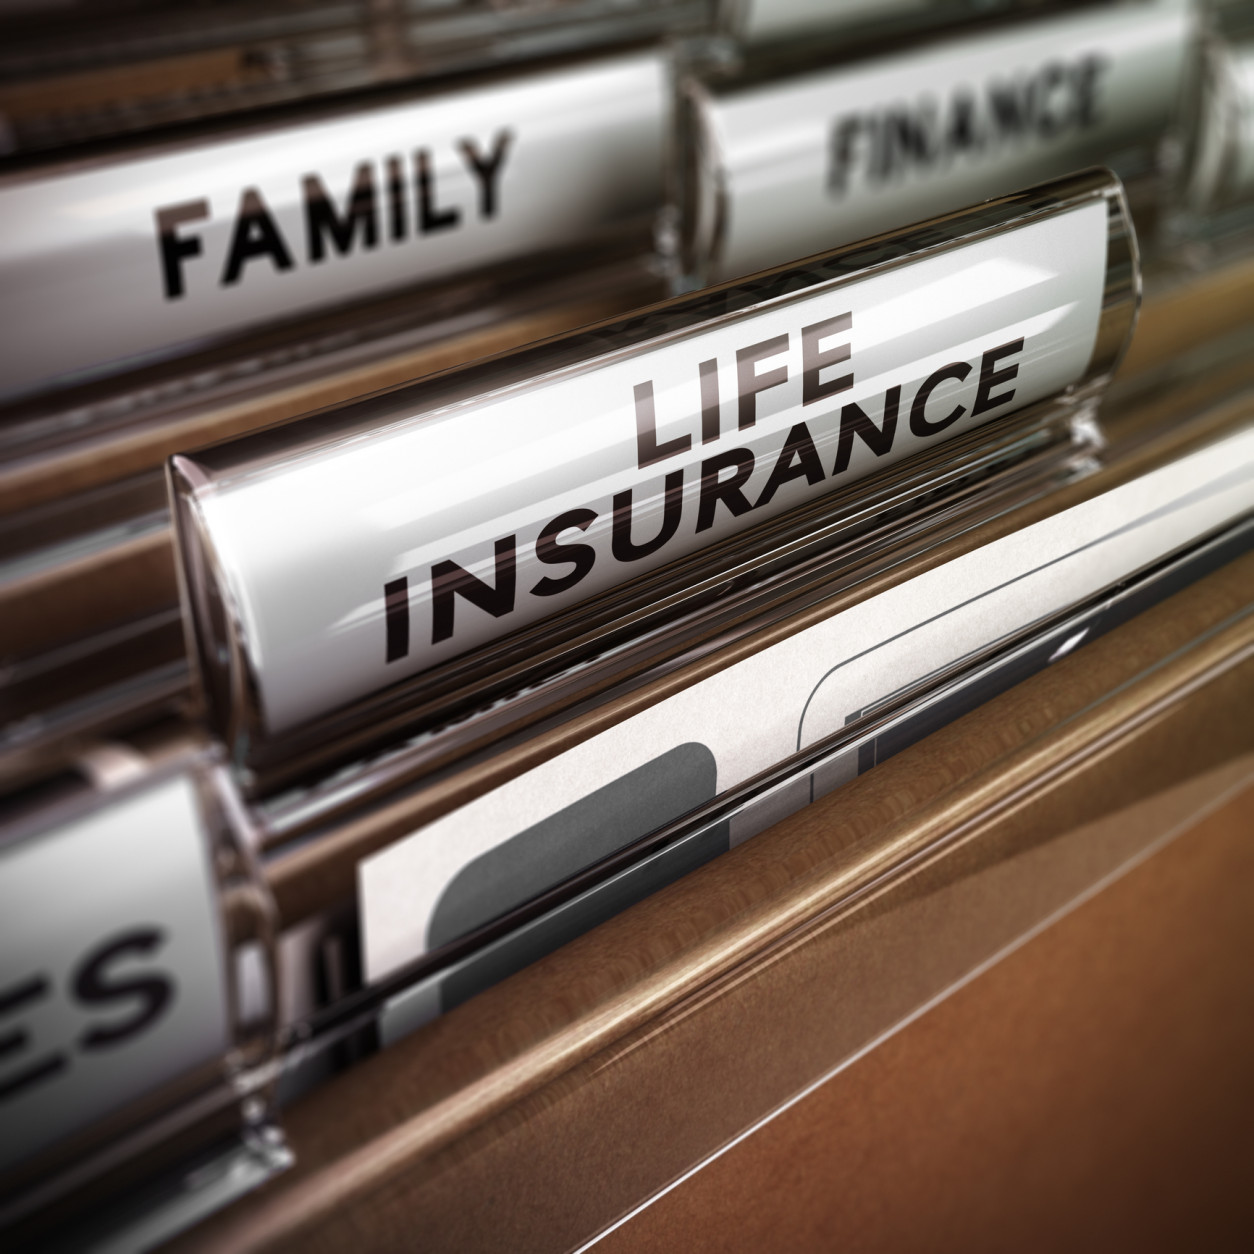 The traditional advice for life insurance may not provide enough coverage. (Thinkstock)